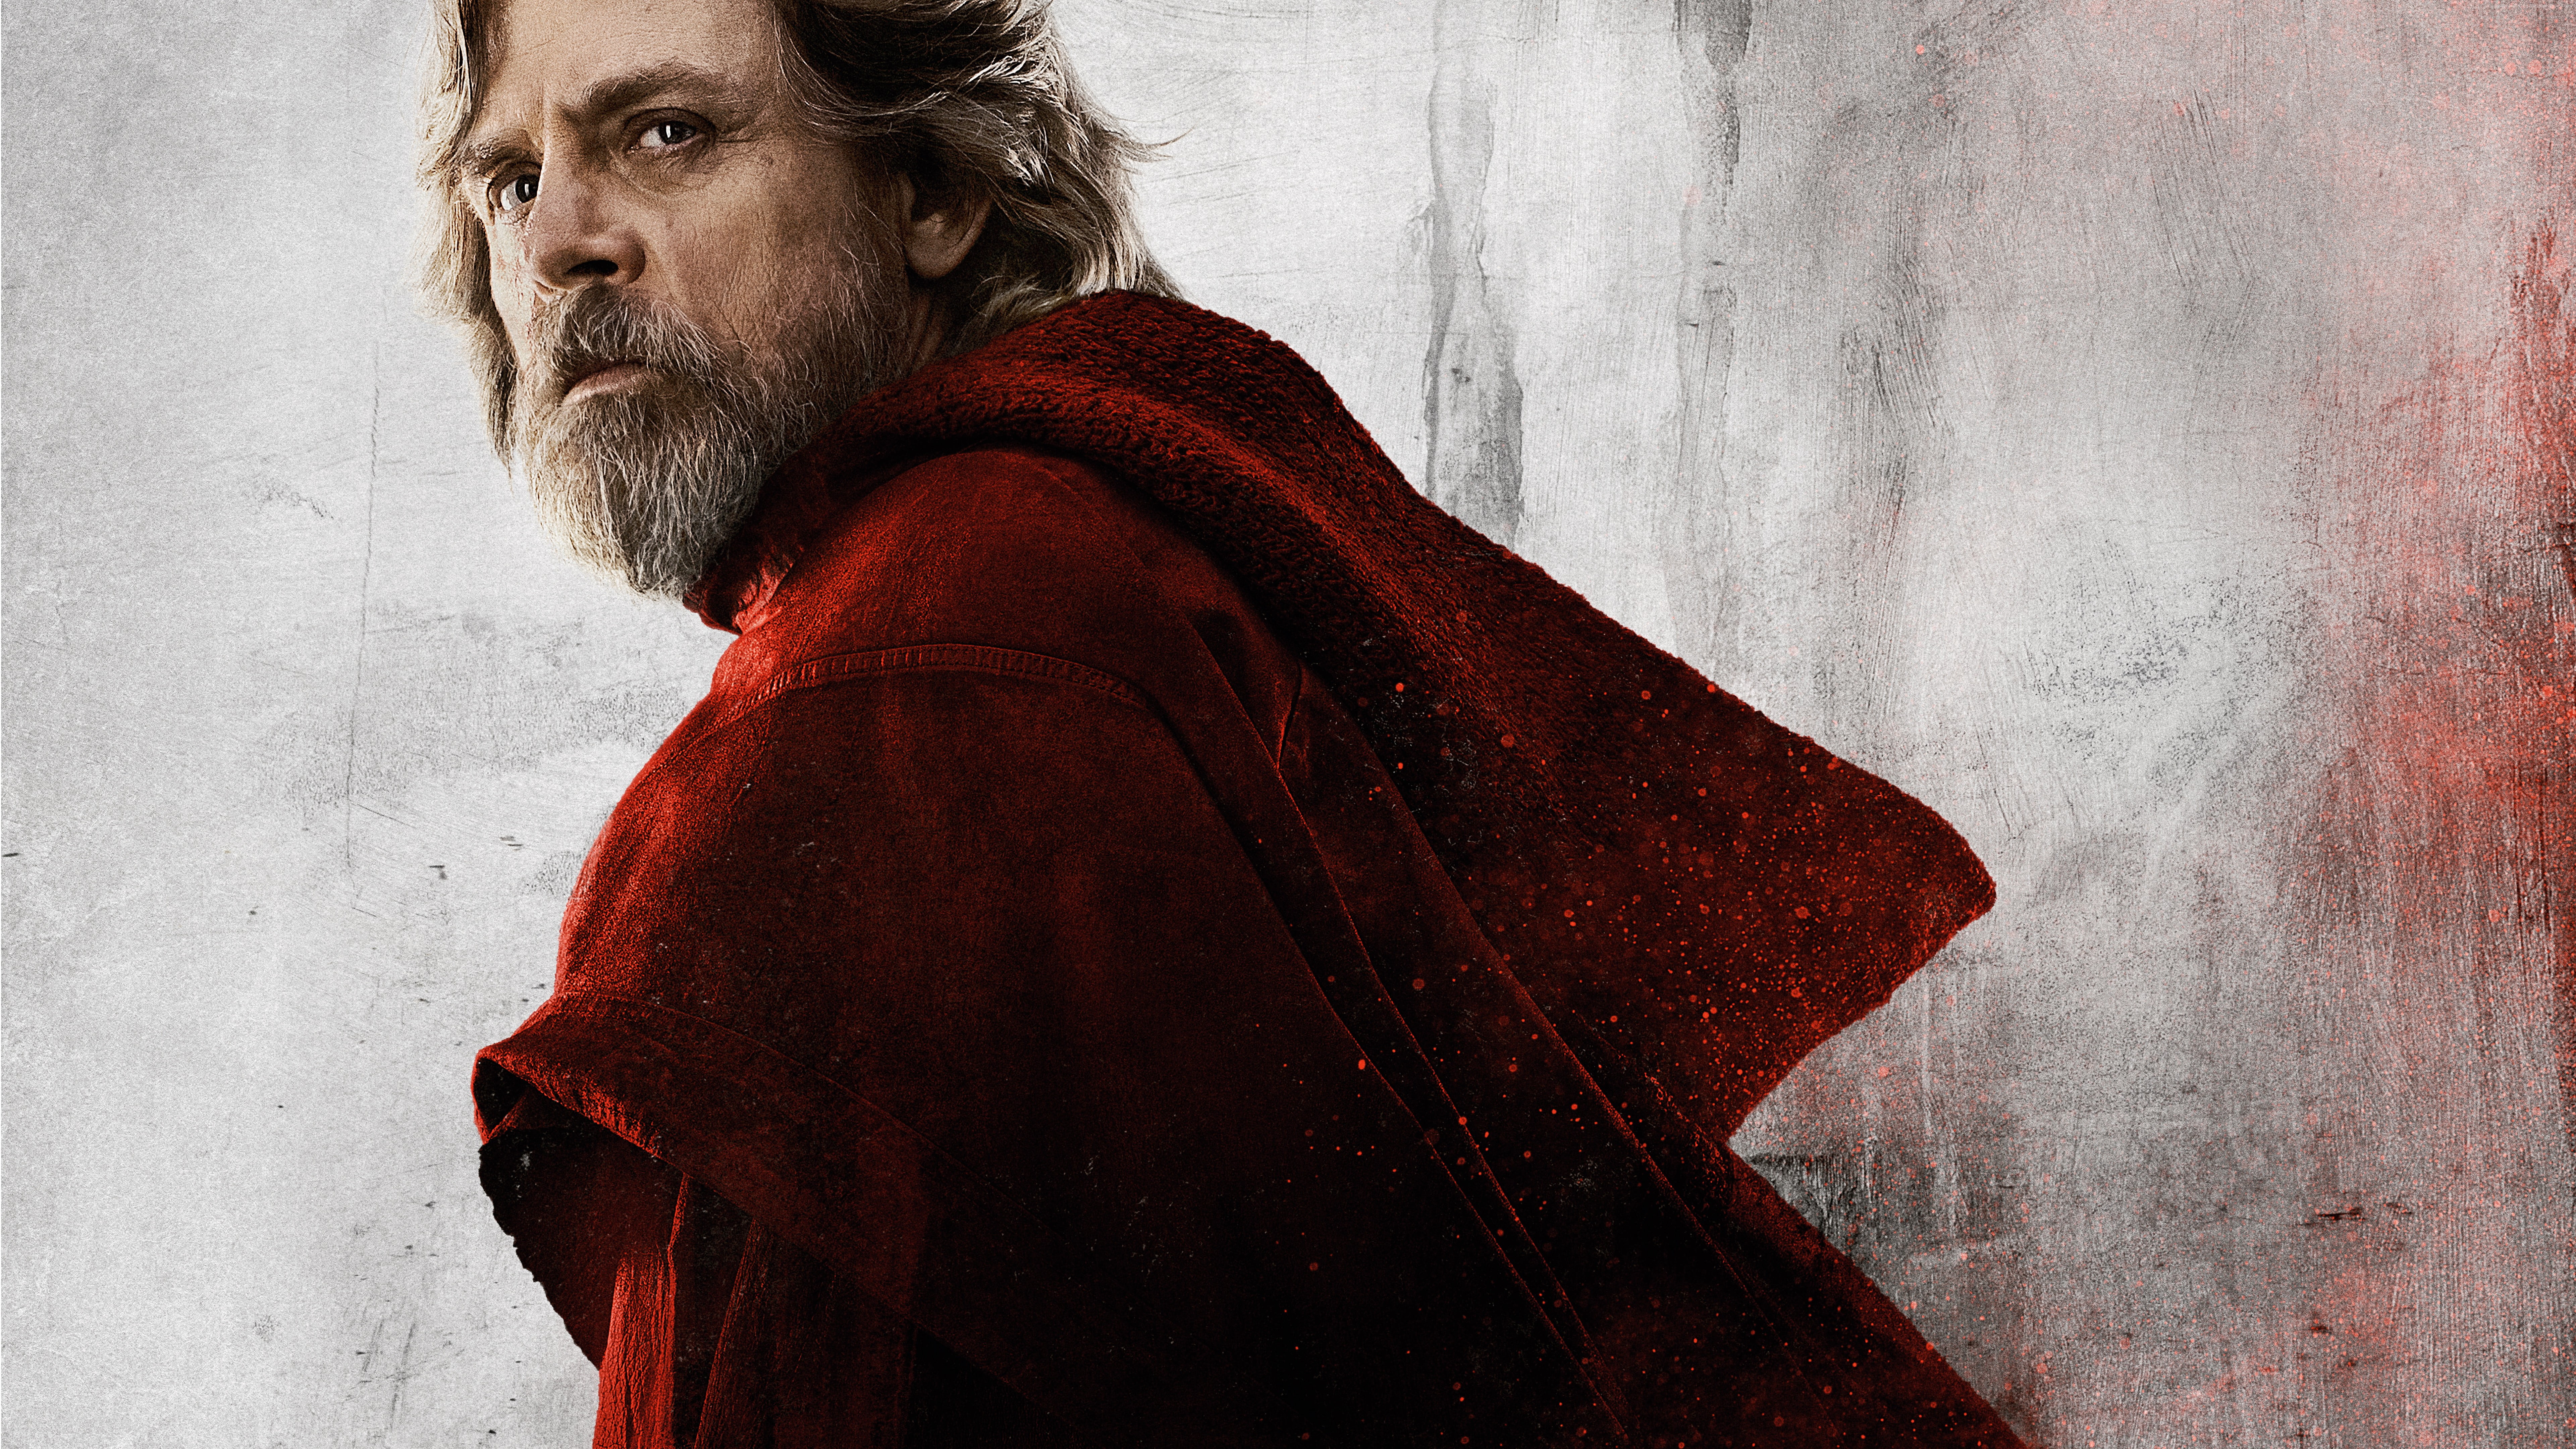 Man In Red Cloak Hd Wallpaper Wallpaper Flare Images, Photos, Reviews